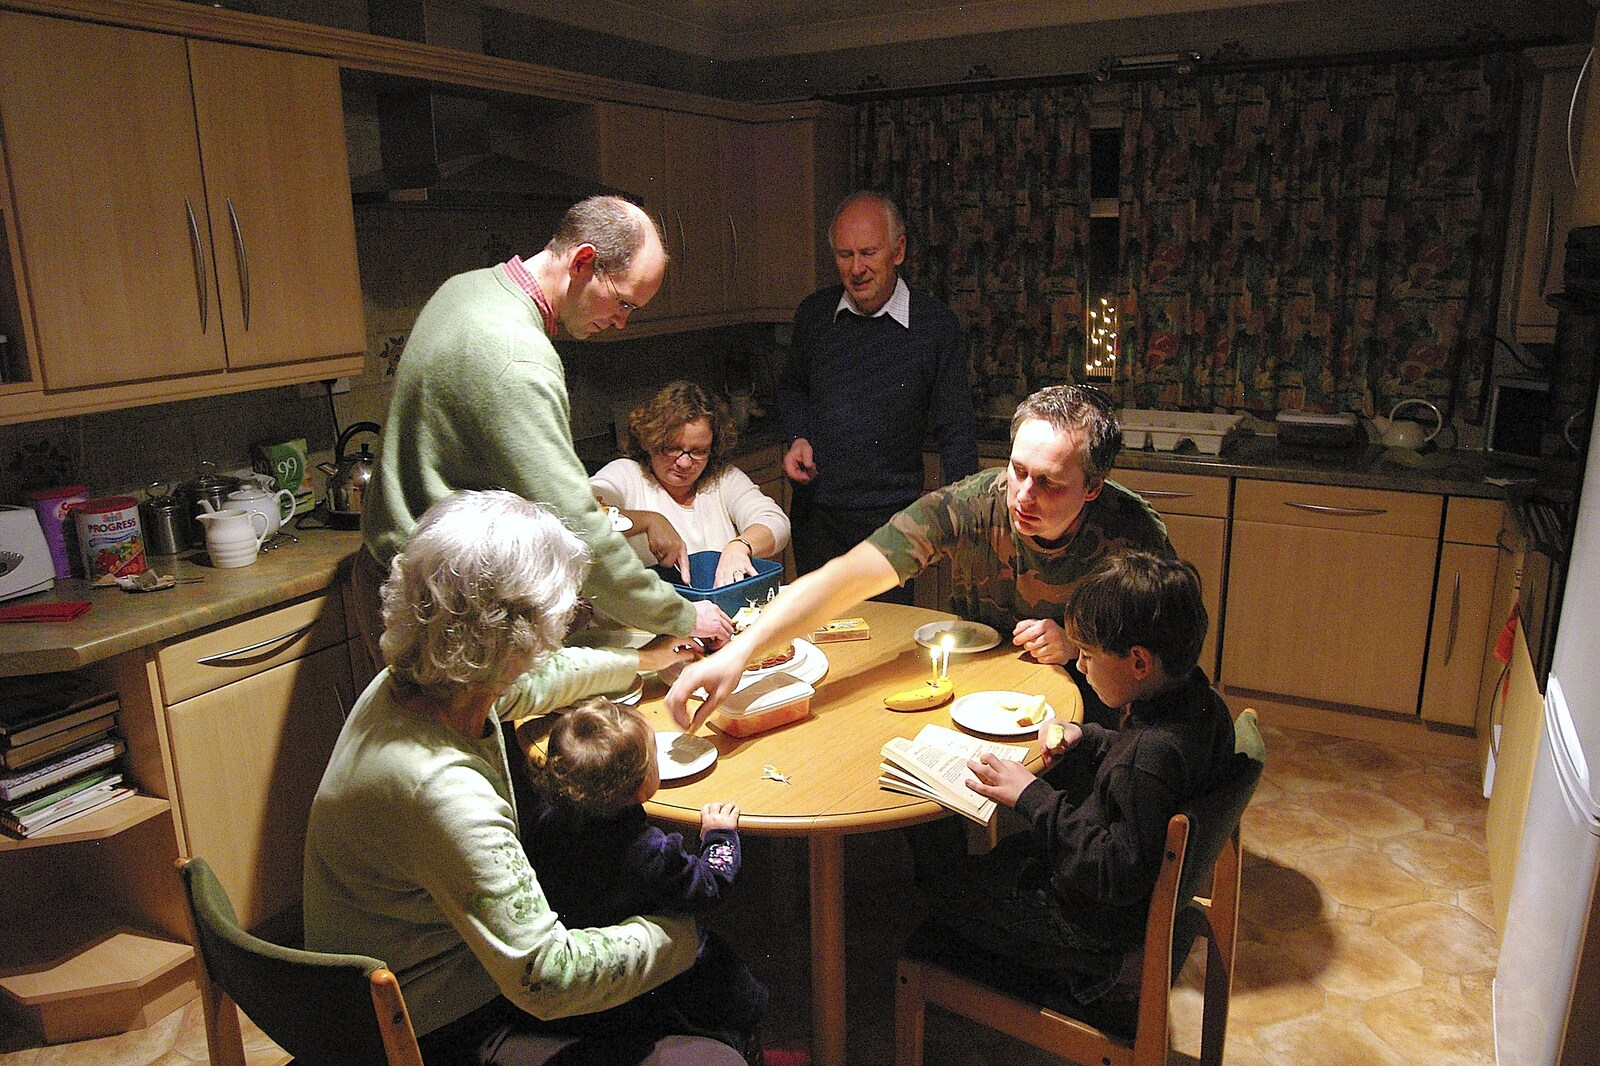 The clan in the kitchen from Boxing Day Miscellany, Hordle and Barton-on-Sea, Hampshire - 26th December 2005